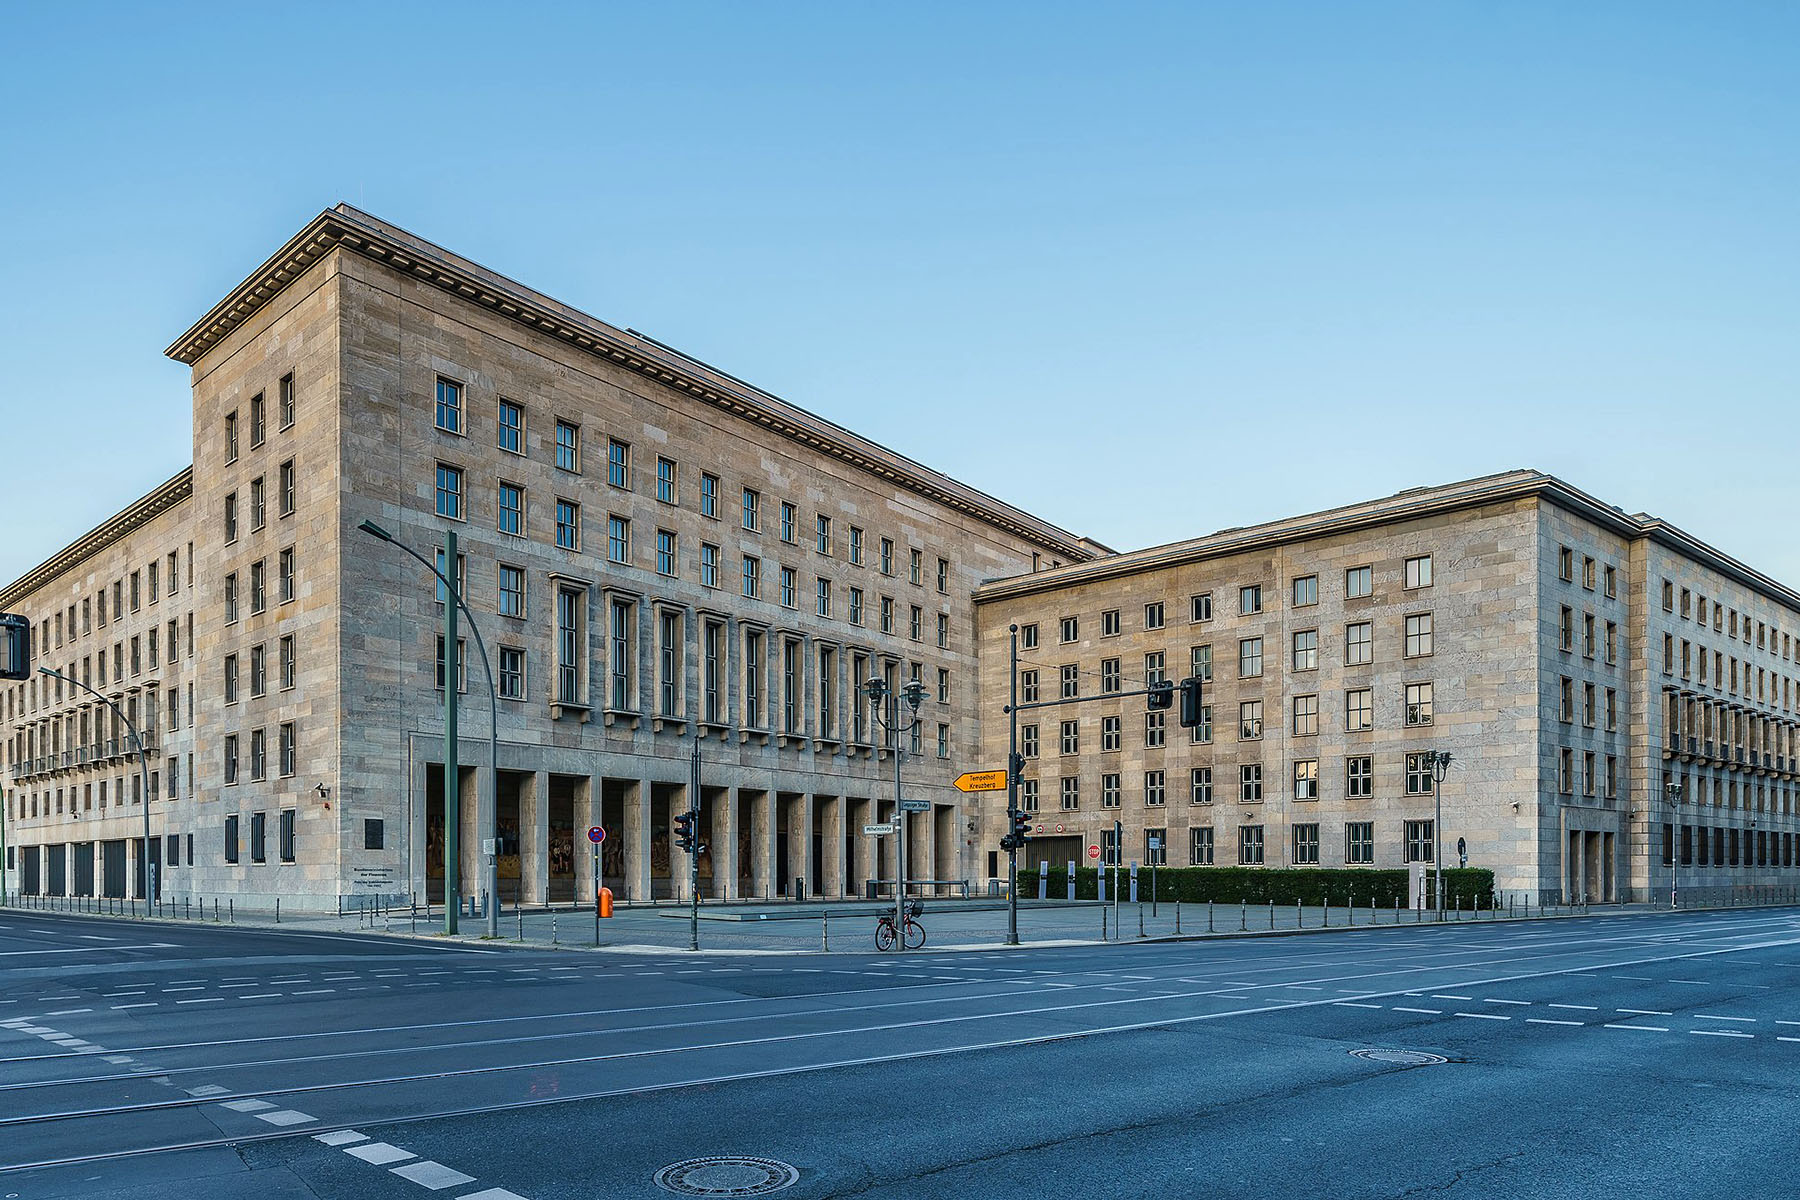 Building of the German Ministry of Finance in Berlin, Germany